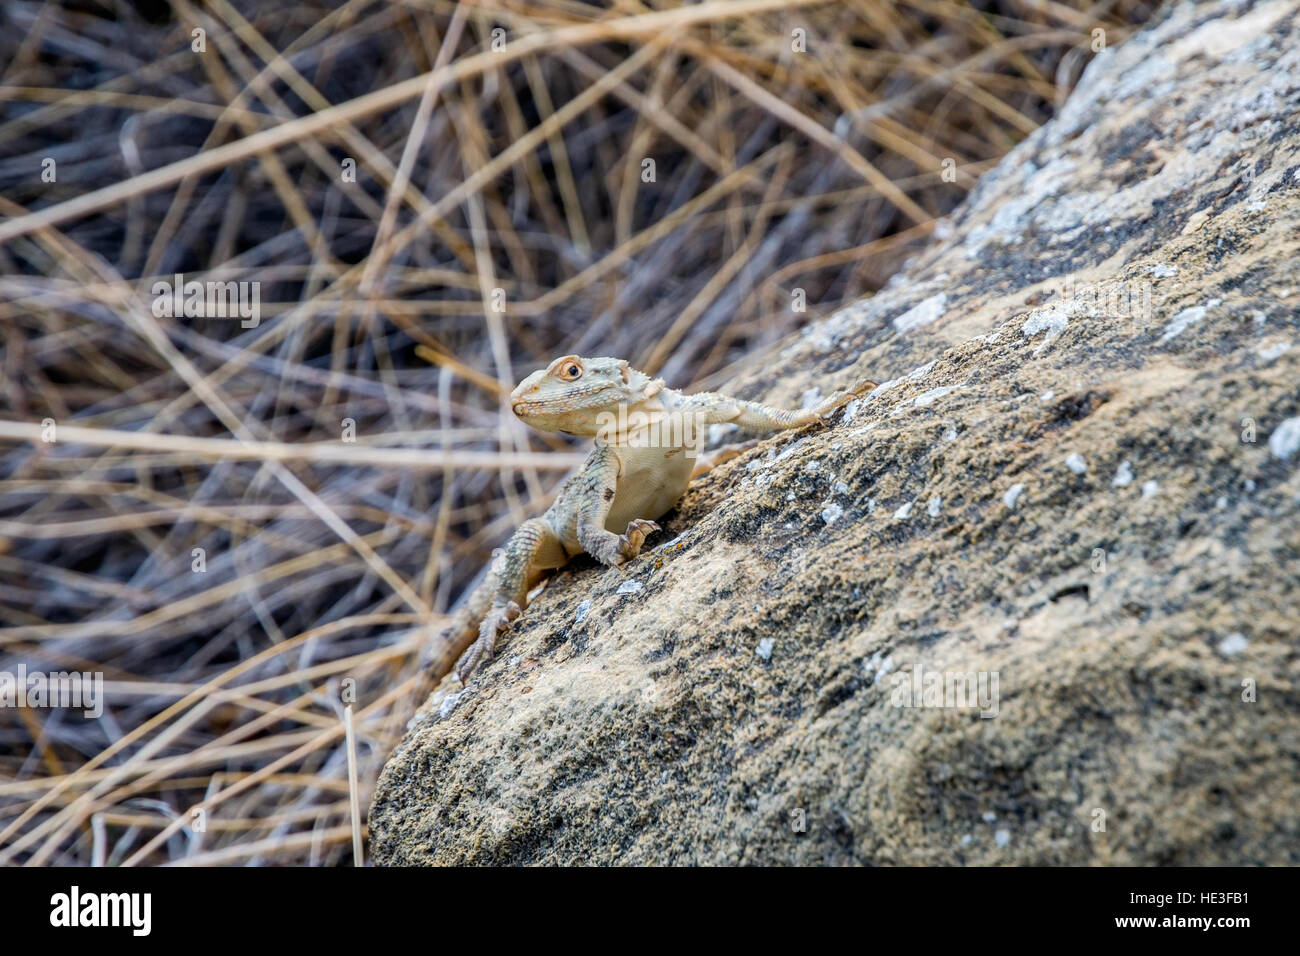 Small lizard in the rock outside Stock Photo